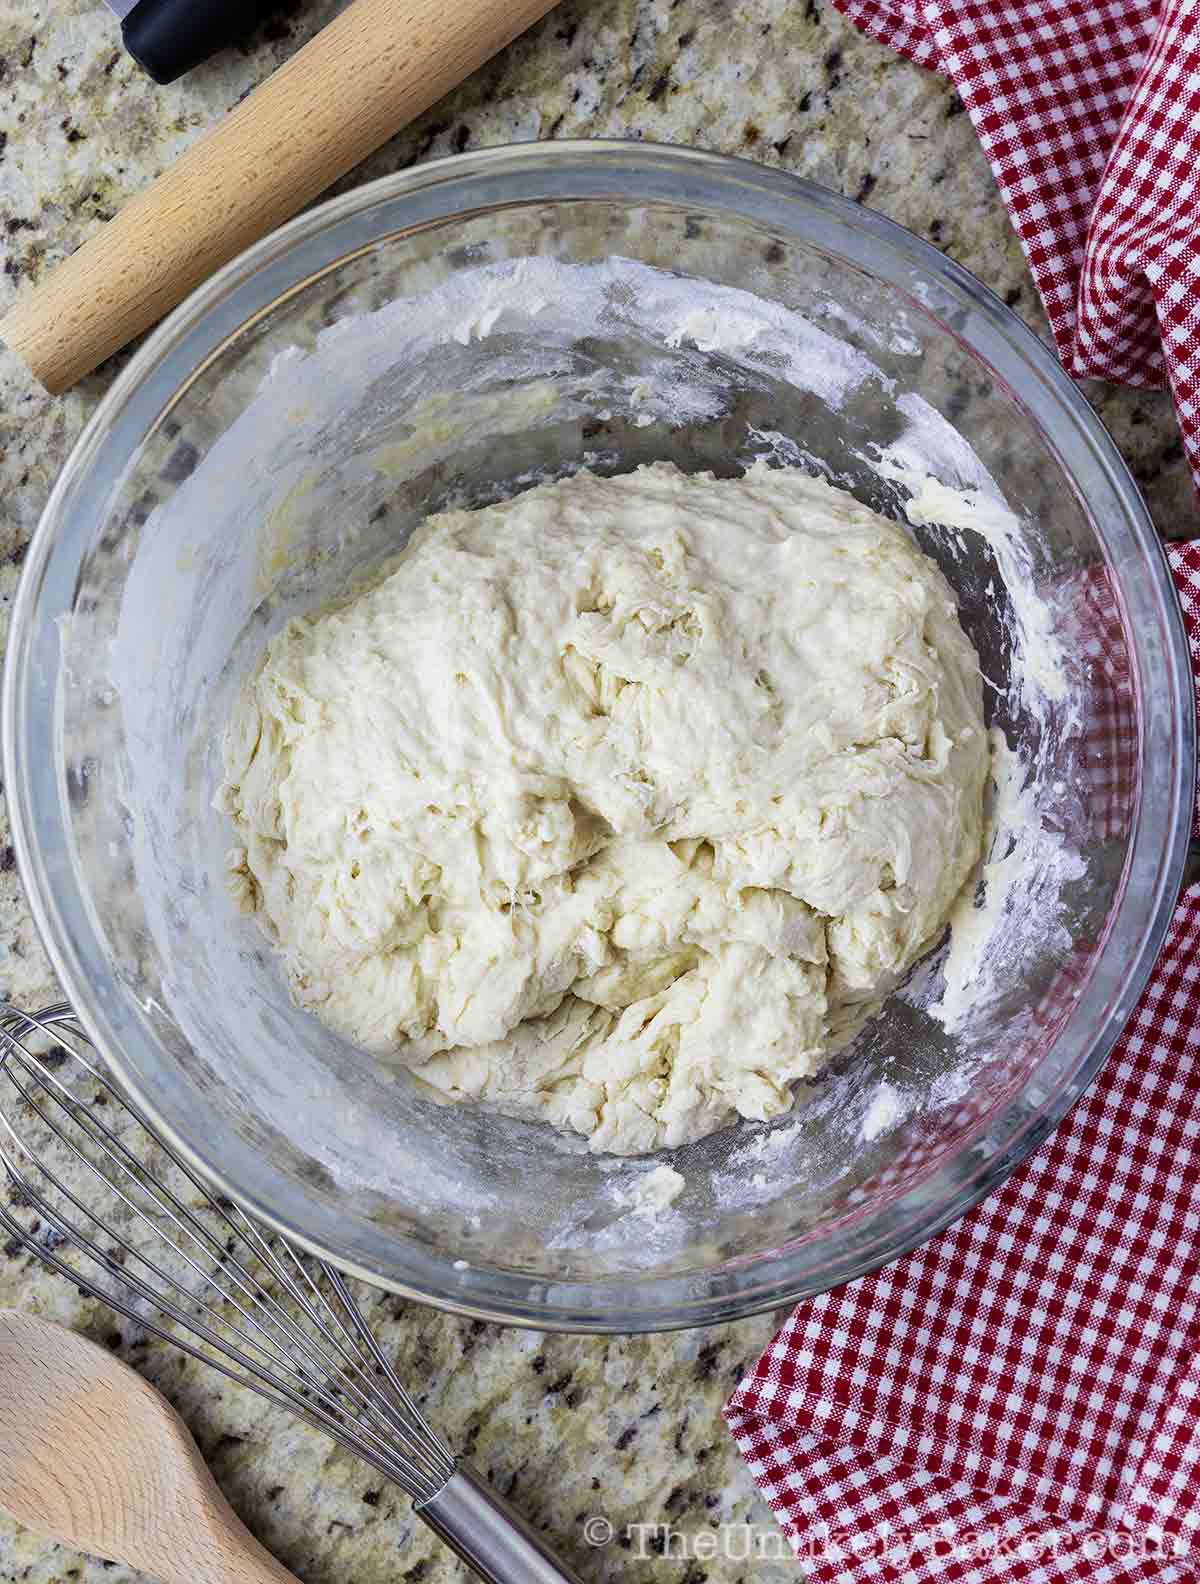 Dough combined until it started pulling together in a ball.